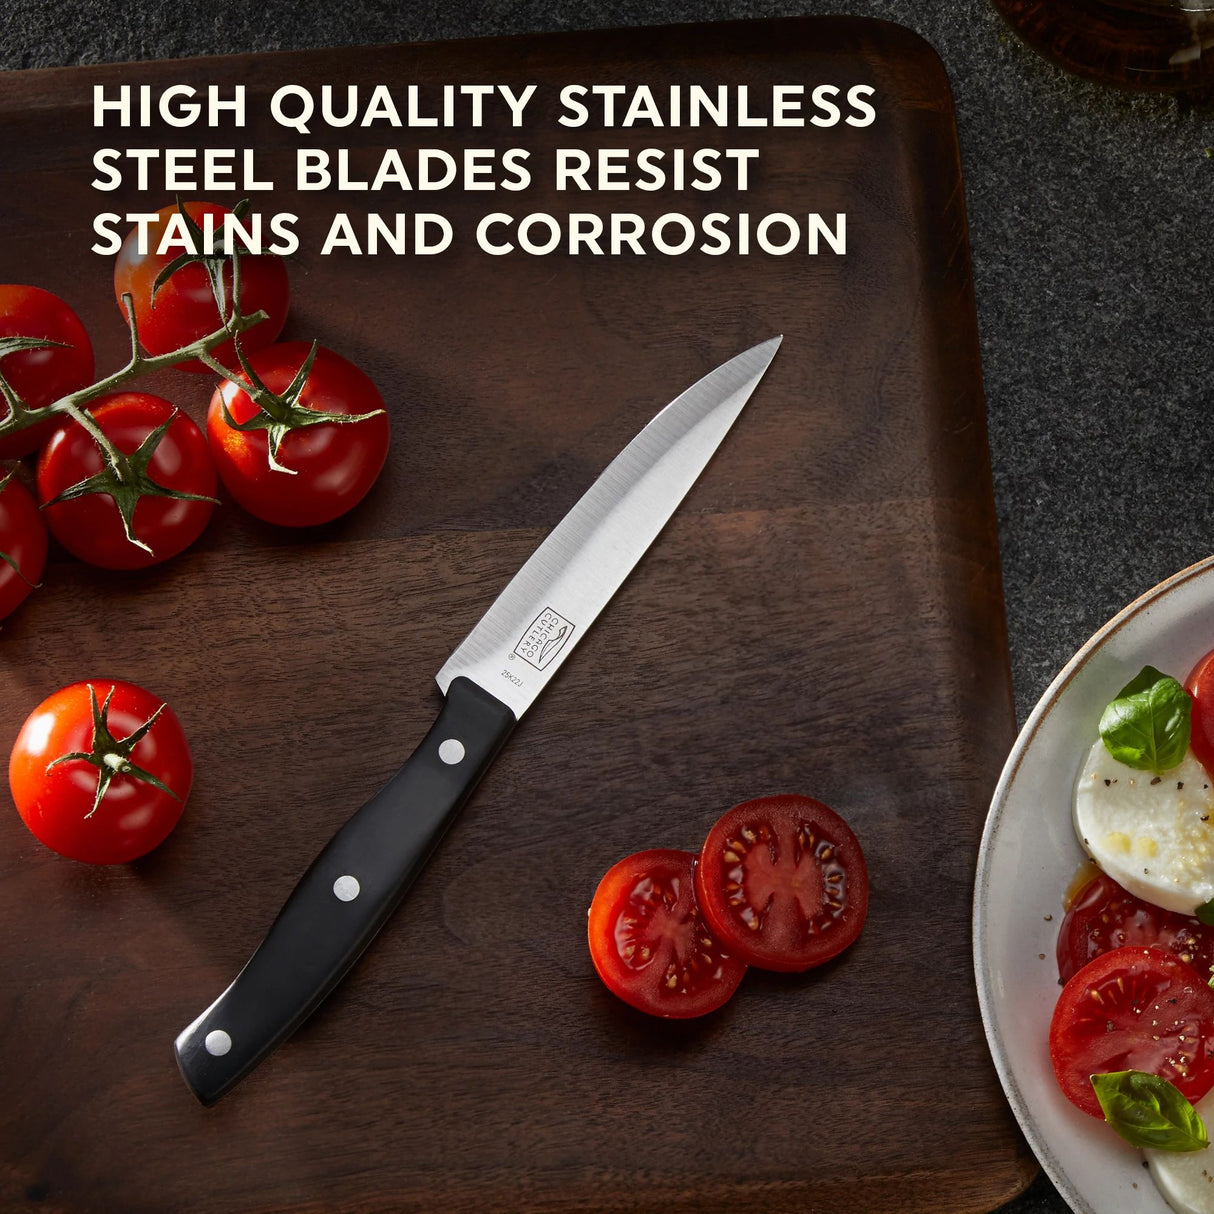  Ellsworth Steak Knife with text high quality stainless steel blades resist stains &amp; corrosion